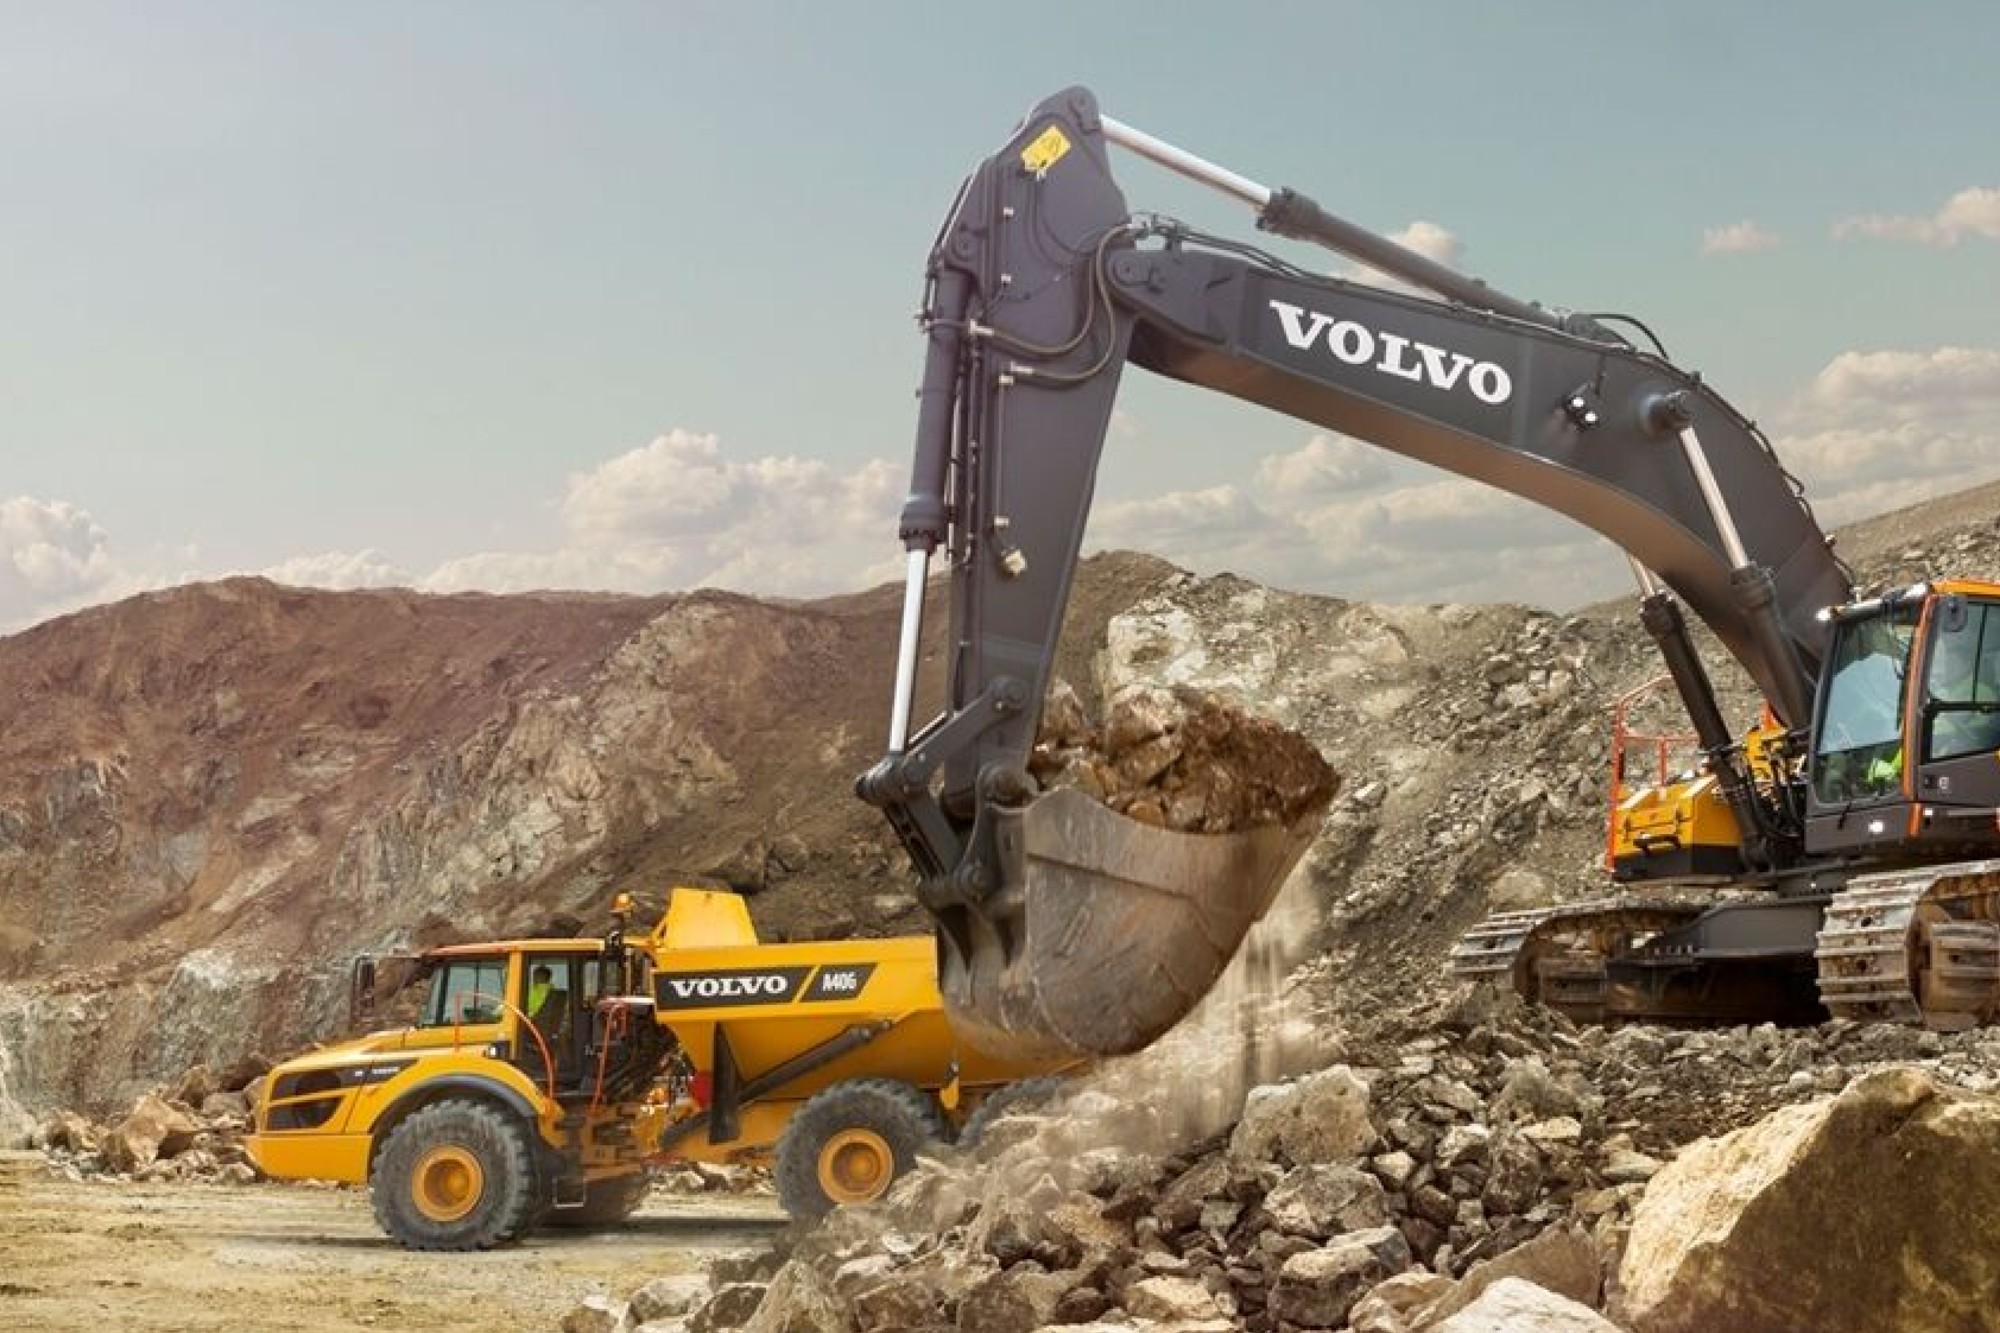 Portuguese firm Nors Group has finalised the acquisition of Great West Equipment, a prominent player in Canada's heavy mobility and construction equipment sectors, for approximately $150 million.